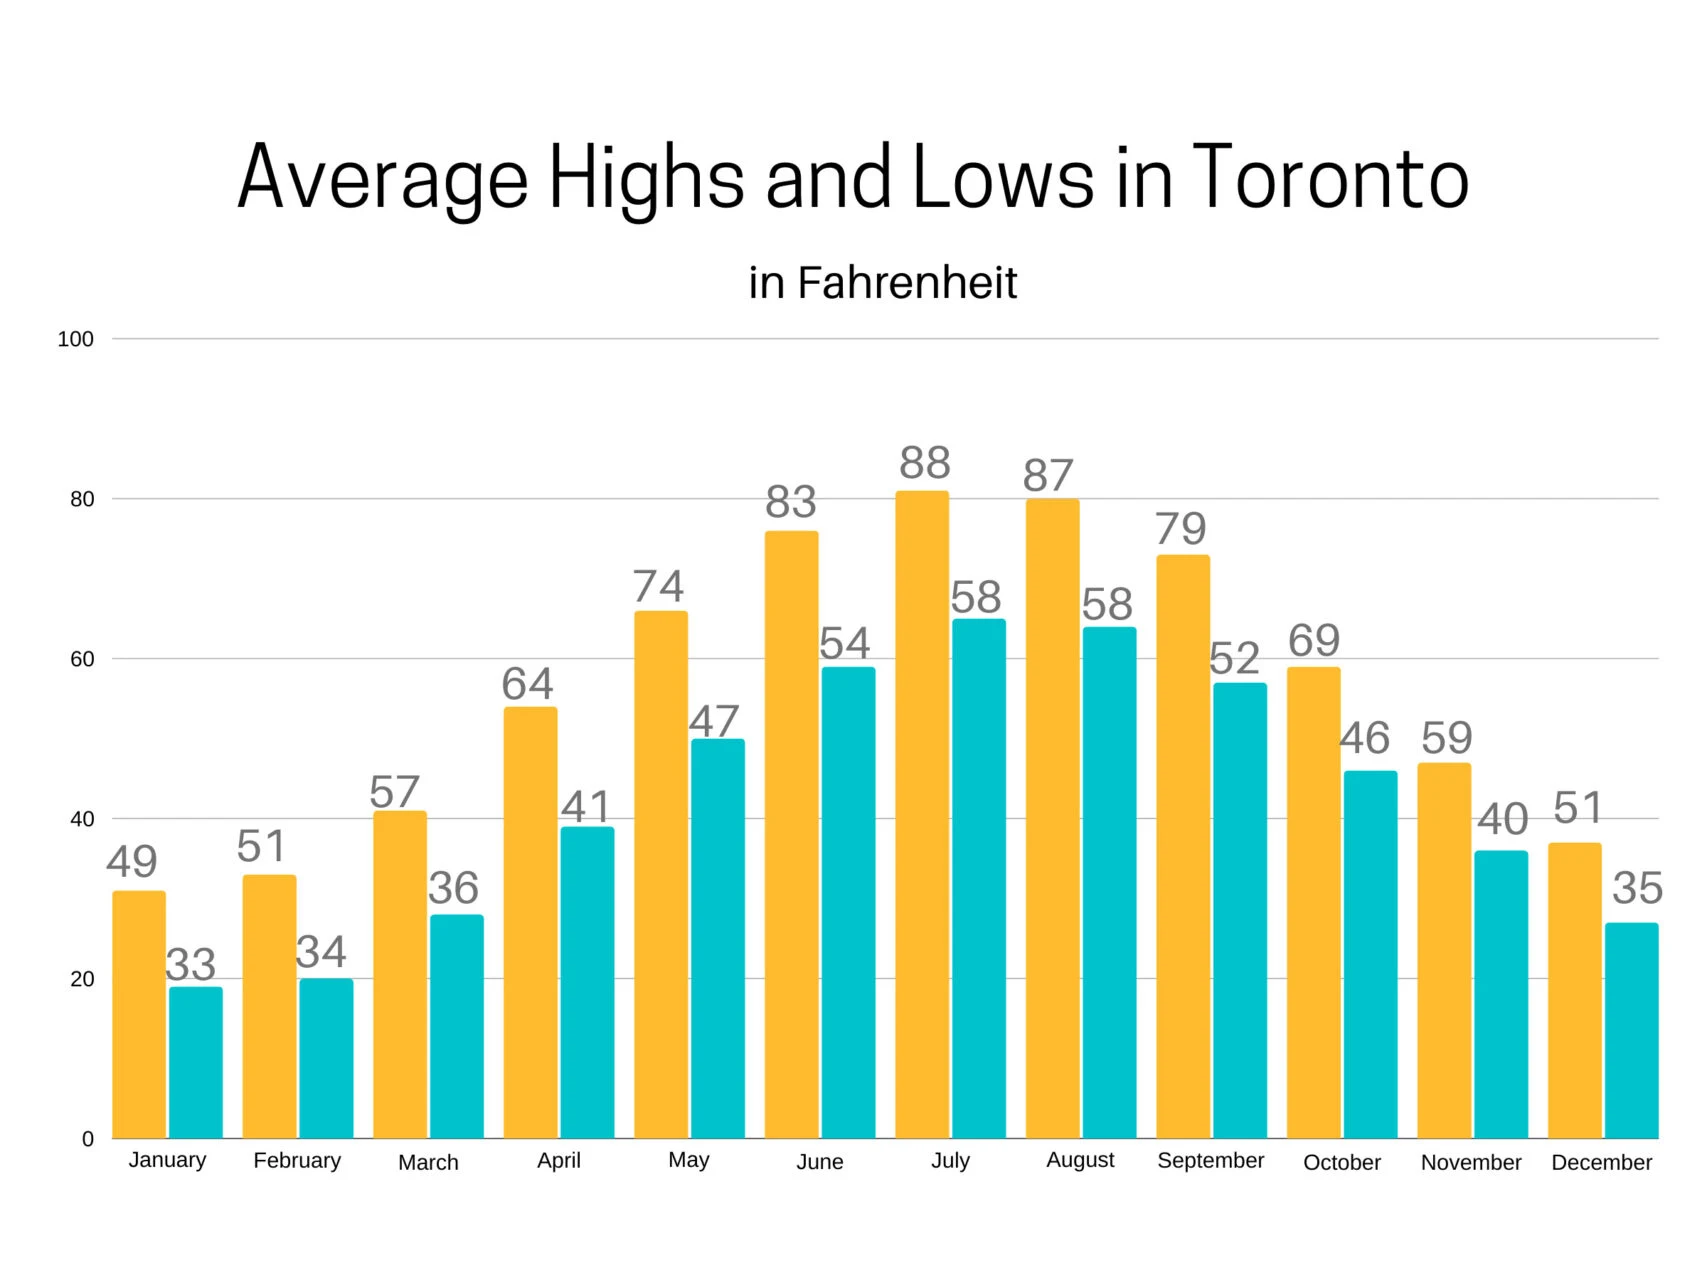 Average High and Low Temperatures in Toronto.